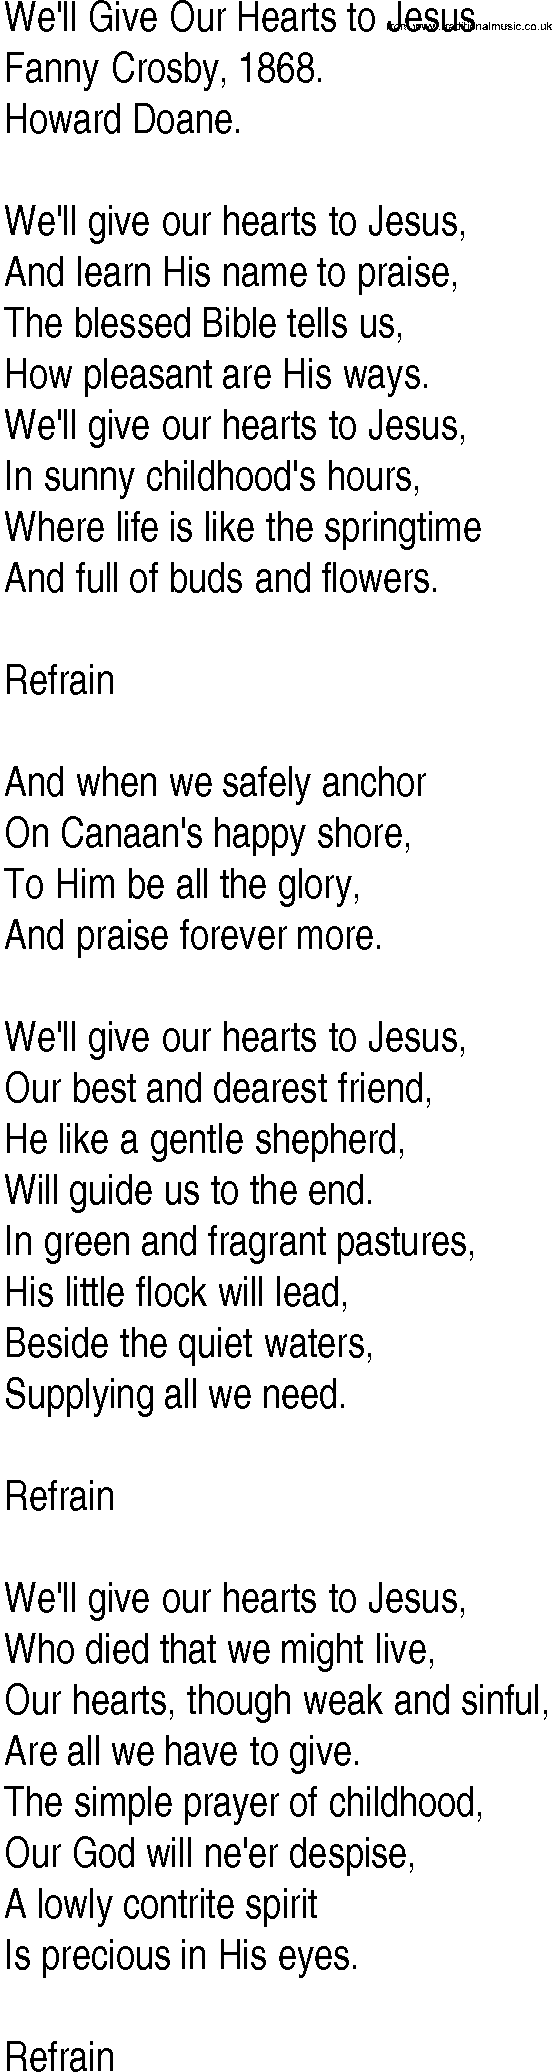 Hymn and Gospel Song: We'll Give Our Hearts to Jesus by Fanny Crosby lyrics